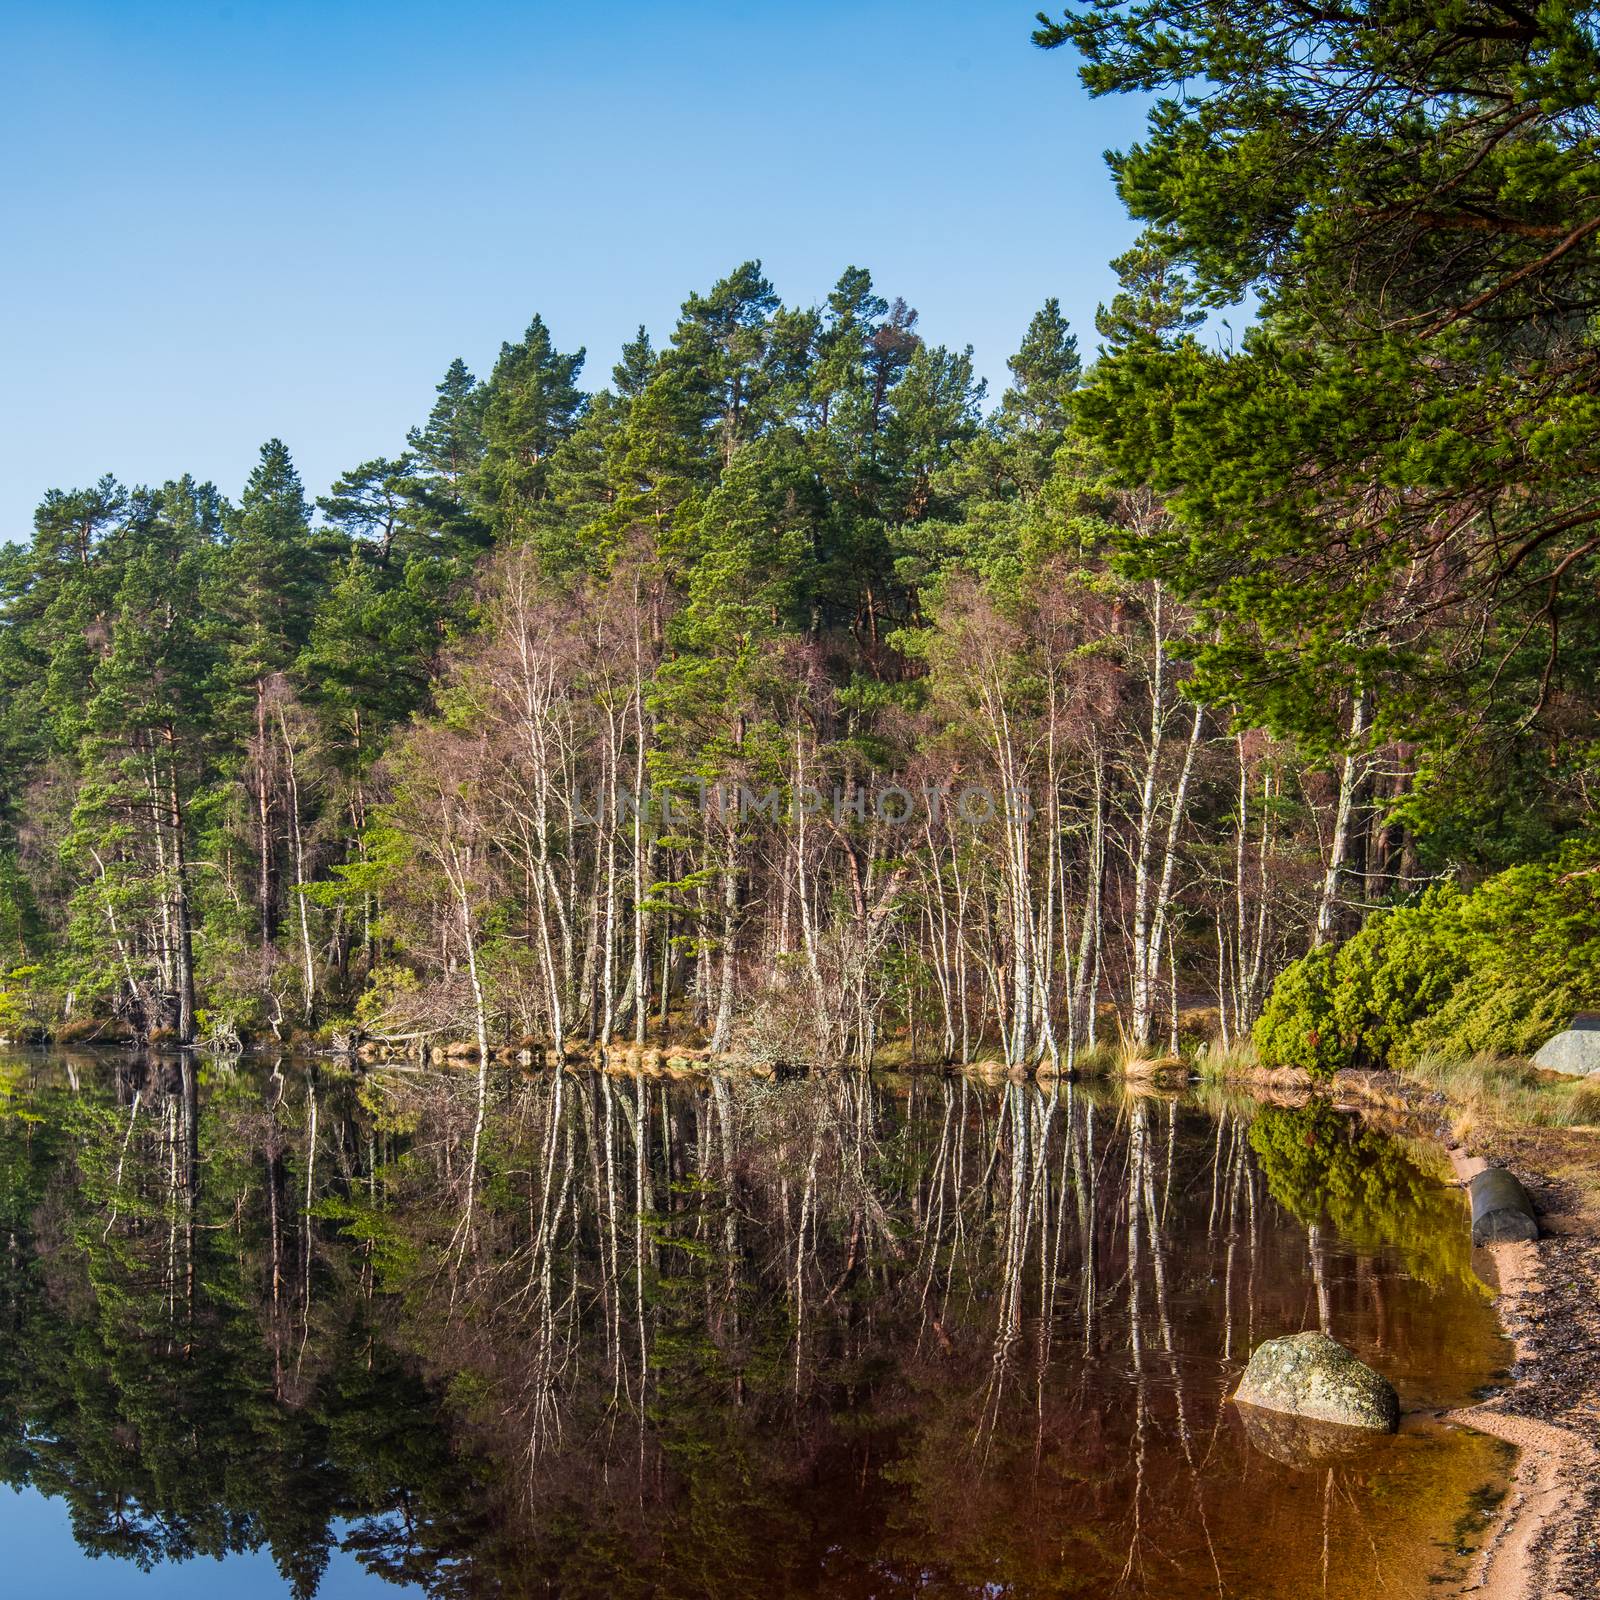 Loch Garten in the Strathspey area of the Cairngorms National Park, in Scotland. It is surrounded by the tall Caledonian pine trees of the Abernethy Forest